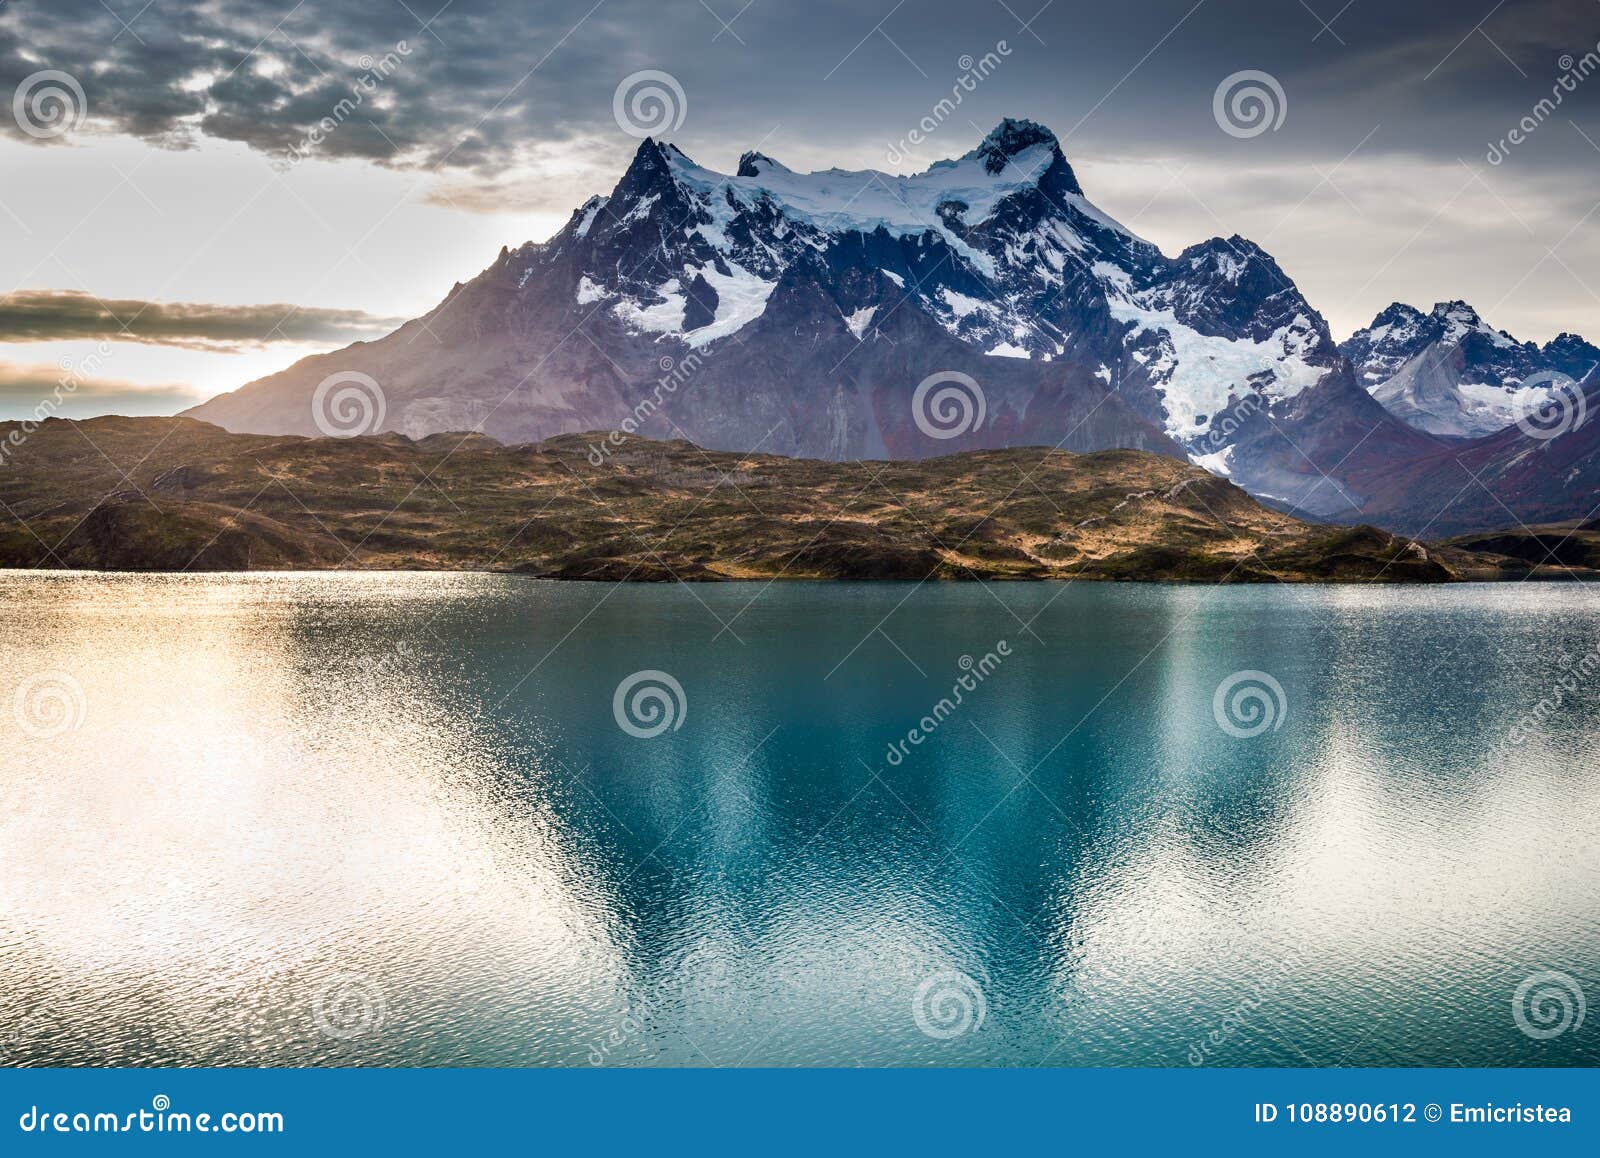 torres del paine and pehoe lake, patagonia, chile